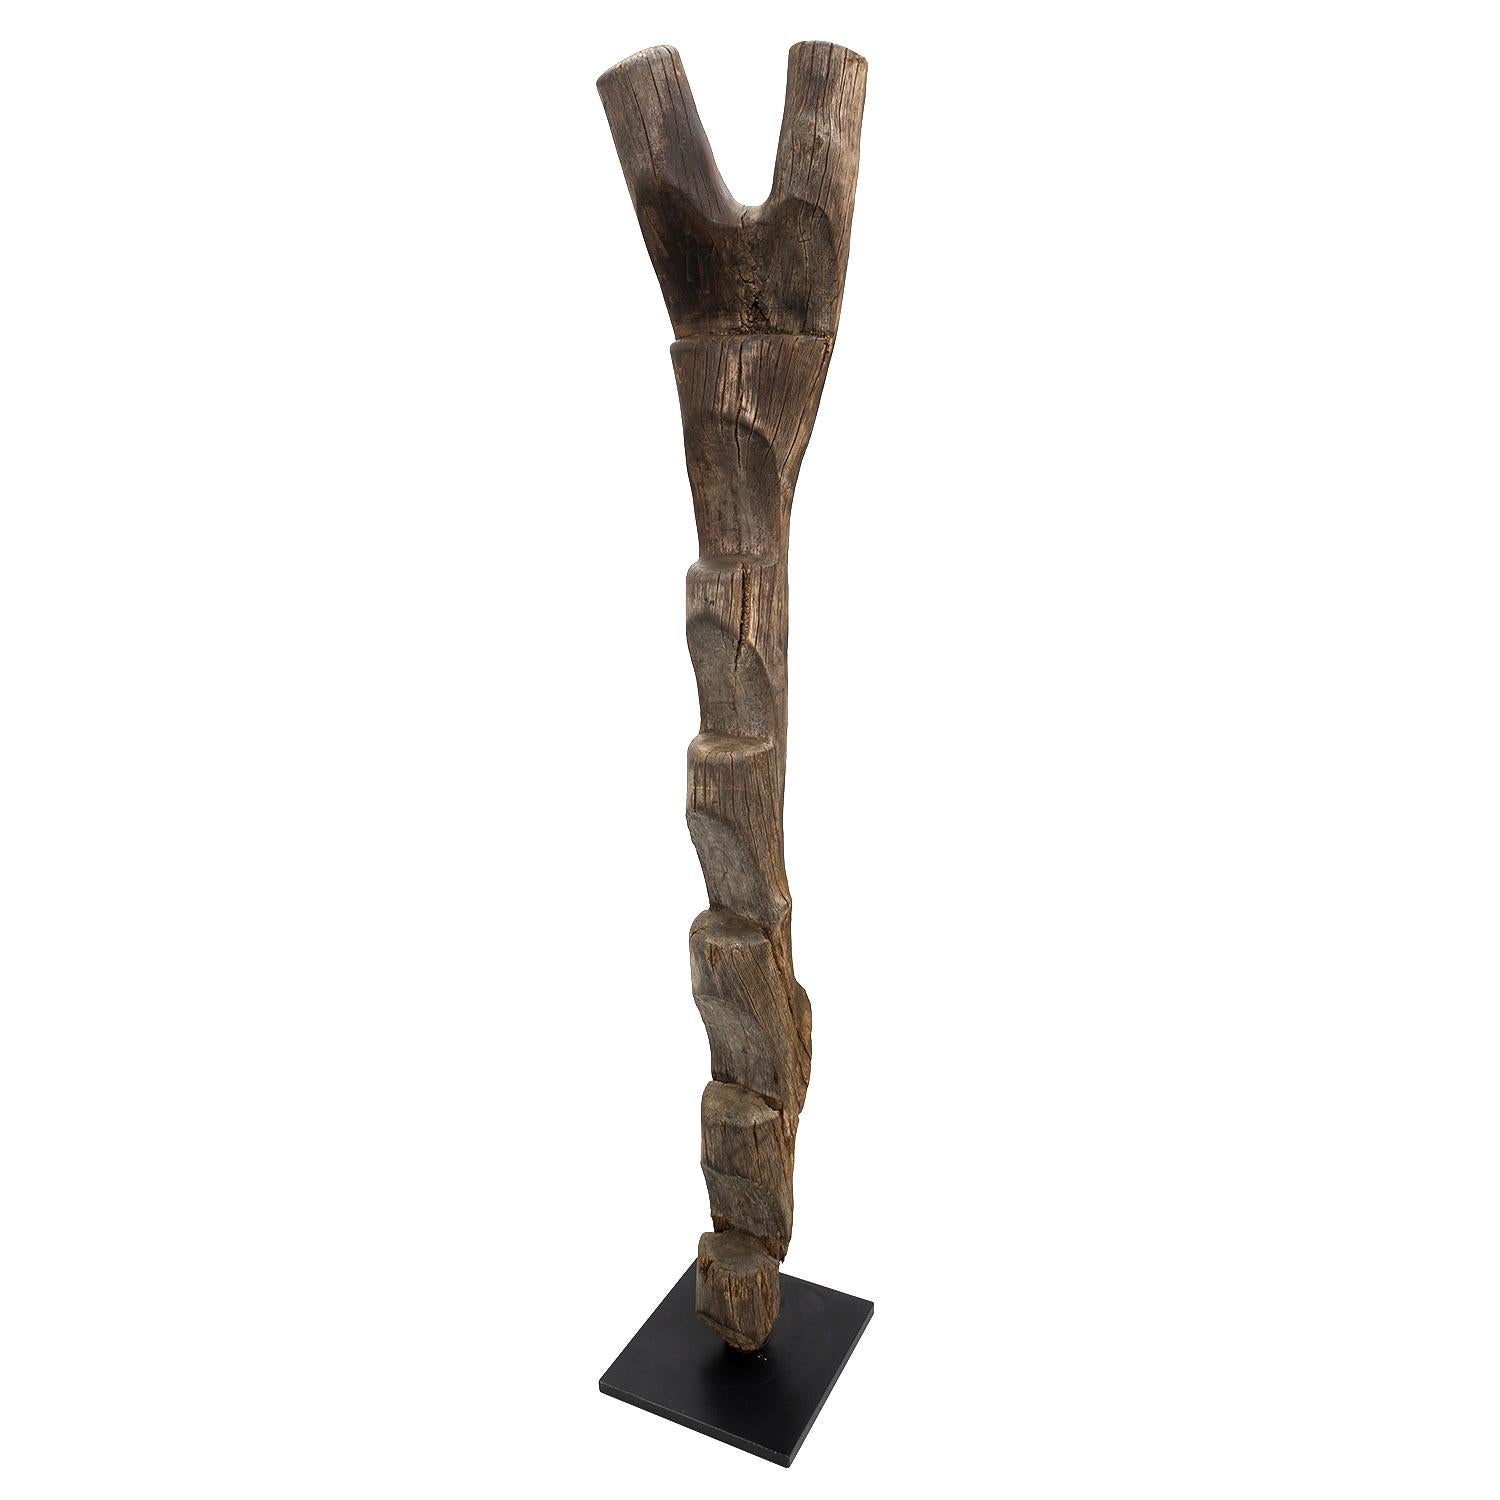 Large Dogon ladder, Mali

Wood

Early to mid-20th century

Measures: 68 x 13 in. / 173 x 33 cm

With a textured, eroded patina, this ladder was originally used outdoors. Carved from a naturally forked tree, indoor versions wear to a smooth